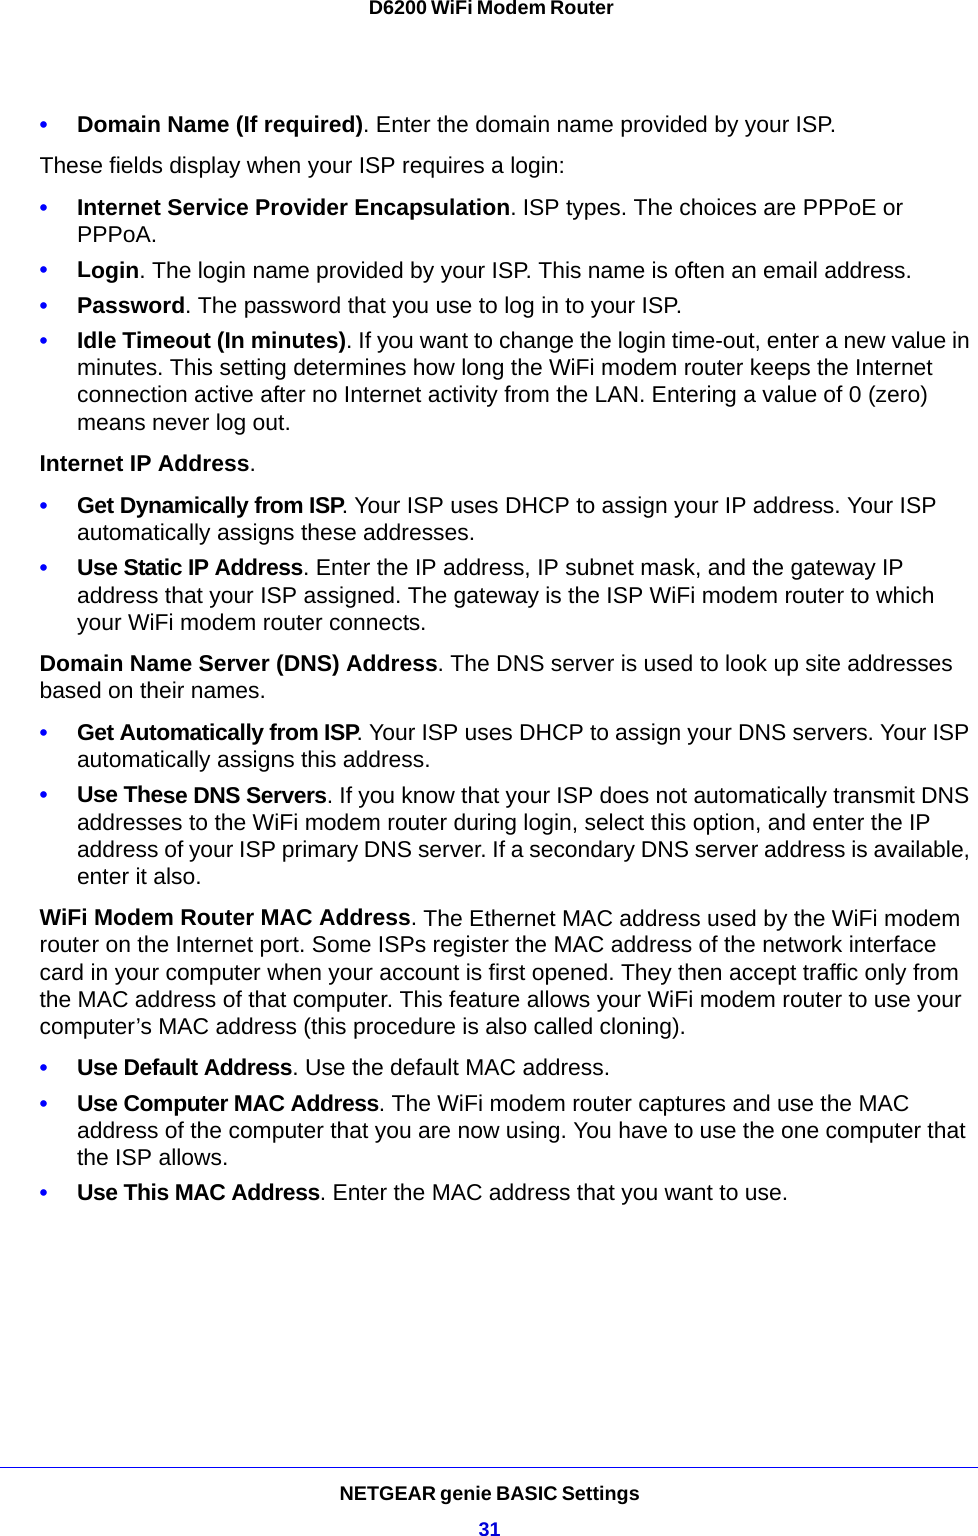 NETGEAR genie BASIC Settings31 D6200 WiFi Modem Router•Domain Name (If required). Enter the domain name provided by your ISP.These fields display when your ISP requires a login:•Internet Service Provider Encapsulation. ISP types. The choices are PPPoE or PPPoA.•Login. The login name provided by your ISP. This name is often an email address.•Password. The password that you use to log in to your ISP. •Idle Timeout (In minutes). If you want to change the login time-out, enter a new value in minutes. This setting determines how long the WiFi modem router keeps the Internet connection active after no Internet activity from the LAN. Entering a value of 0 (zero) means never log out.Internet IP Address.•Get Dynamically from ISP. Your ISP uses DHCP to assign your IP address. Your ISP automatically assigns these addresses.•Use Static IP Address. Enter the IP address, IP subnet mask, and the gateway IP address that your ISP assigned. The gateway is the ISP WiFi modem router to which your WiFi modem router connects.Domain Name Server (DNS) Address. The DNS server is used to look up site addresses based on their names. •Get Automatically from ISP. Your ISP uses DHCP to assign your DNS servers. Your ISP automatically assigns this address. •Use These DNS Servers. If you know that your ISP does not automatically transmit DNS addresses to the WiFi modem router during login, select this option, and enter the IP address of your ISP primary DNS server. If a secondary DNS server address is available, enter it also.WiFi Modem Router MAC Address. The Ethernet MAC address used by the WiFi modem router on the Internet port. Some ISPs register the MAC address of the network interface card in your computer when your account is first opened. They then accept traffic only from the MAC address of that computer. This feature allows your WiFi modem router to use your computer’s MAC address (this procedure is also called cloning). •Use Default Address. Use the default MAC address.•Use Computer MAC Address. The WiFi modem router captures and use the MAC address of the computer that you are now using. You have to use the one computer that the ISP allows.•Use This MAC Address. Enter the MAC address that you want to use.